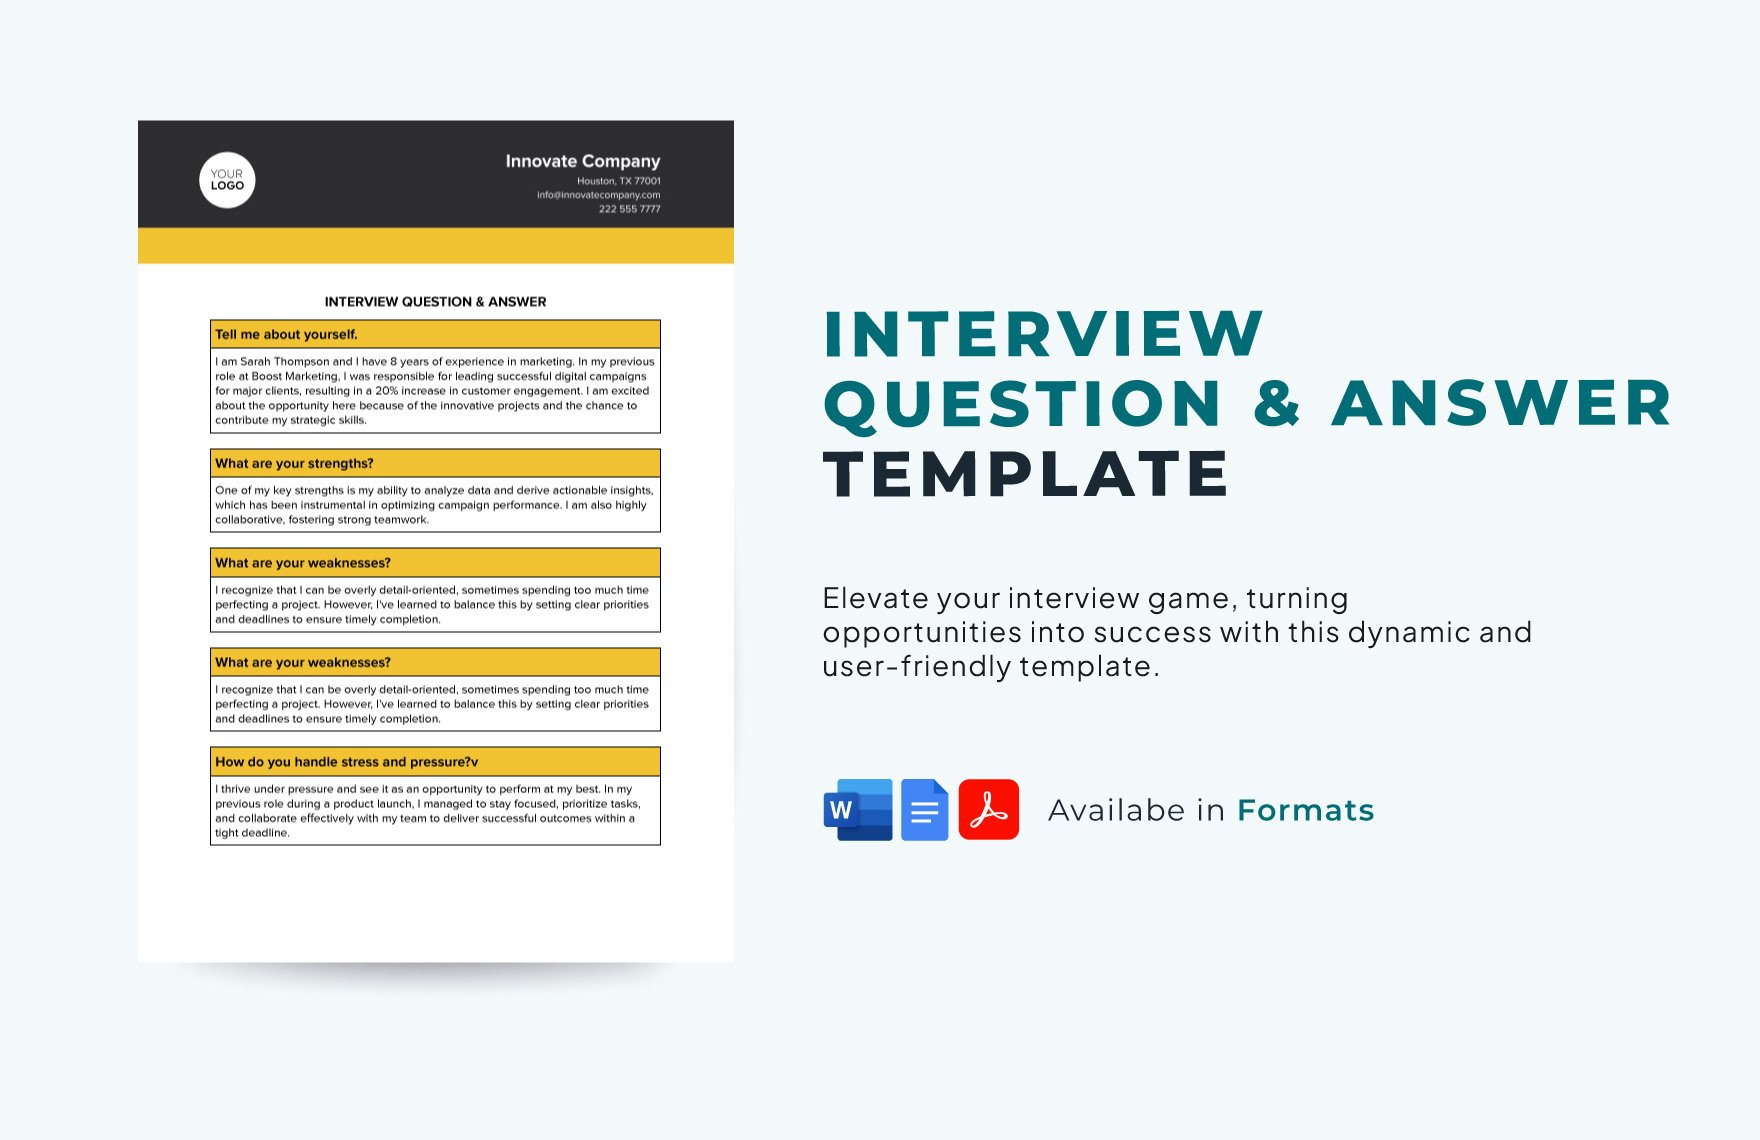 Interview Question & Answer Template